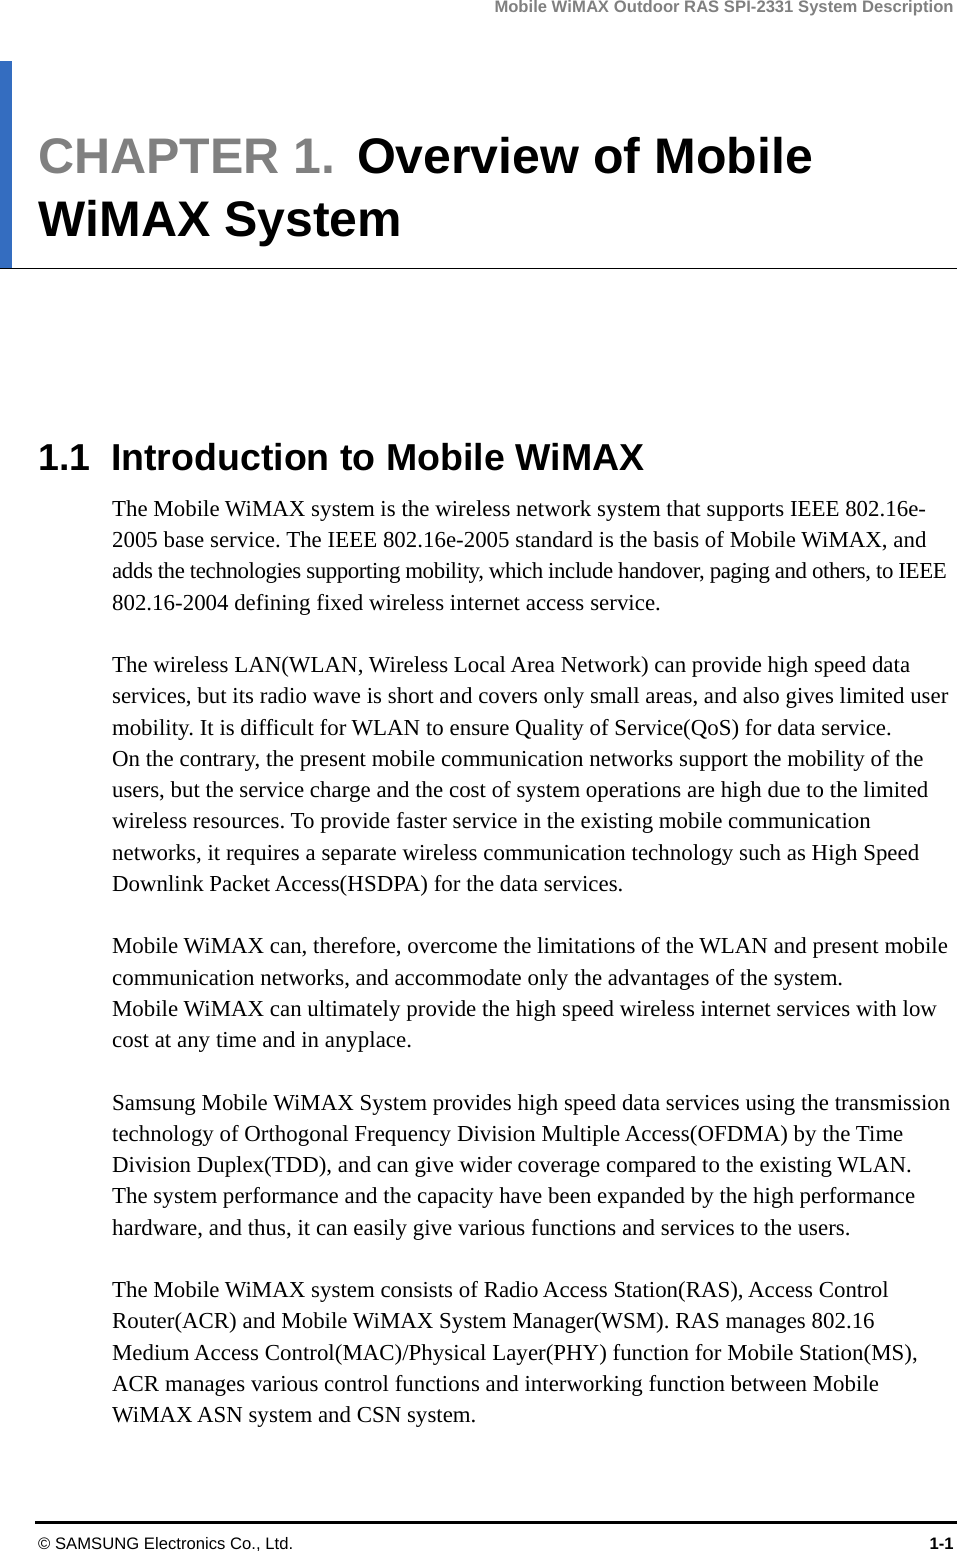 Mobile WiMAX Outdoor RAS SPI-2331 System Description © SAMSUNG Electronics Co., Ltd.  1-1 CHAPTER 1.  Overview of Mobile WiMAX System      1.1  Introduction to Mobile WiMAX The Mobile WiMAX system is the wireless network system that supports IEEE 802.16e-2005 base service. The IEEE 802.16e-2005 standard is the basis of Mobile WiMAX, and adds the technologies supporting mobility, which include handover, paging and others, to IEEE 802.16-2004 defining fixed wireless internet access service.  The wireless LAN(WLAN, Wireless Local Area Network) can provide high speed data services, but its radio wave is short and covers only small areas, and also gives limited user mobility. It is difficult for WLAN to ensure Quality of Service(QoS) for data service.   On the contrary, the present mobile communication networks support the mobility of the users, but the service charge and the cost of system operations are high due to the limited wireless resources. To provide faster service in the existing mobile communication networks, it requires a separate wireless communication technology such as High Speed Downlink Packet Access(HSDPA) for the data services.  Mobile WiMAX can, therefore, overcome the limitations of the WLAN and present mobile communication networks, and accommodate only the advantages of the system.   Mobile WiMAX can ultimately provide the high speed wireless internet services with low cost at any time and in anyplace.    Samsung Mobile WiMAX System provides high speed data services using the transmission technology of Orthogonal Frequency Division Multiple Access(OFDMA) by the Time Division Duplex(TDD), and can give wider coverage compared to the existing WLAN.   The system performance and the capacity have been expanded by the high performance hardware, and thus, it can easily give various functions and services to the users.  The Mobile WiMAX system consists of Radio Access Station(RAS), Access Control Router(ACR) and Mobile WiMAX System Manager(WSM). RAS manages 802.16 Medium Access Control(MAC)/Physical Layer(PHY) function for Mobile Station(MS), ACR manages various control functions and interworking function between Mobile WiMAX ASN system and CSN system. 